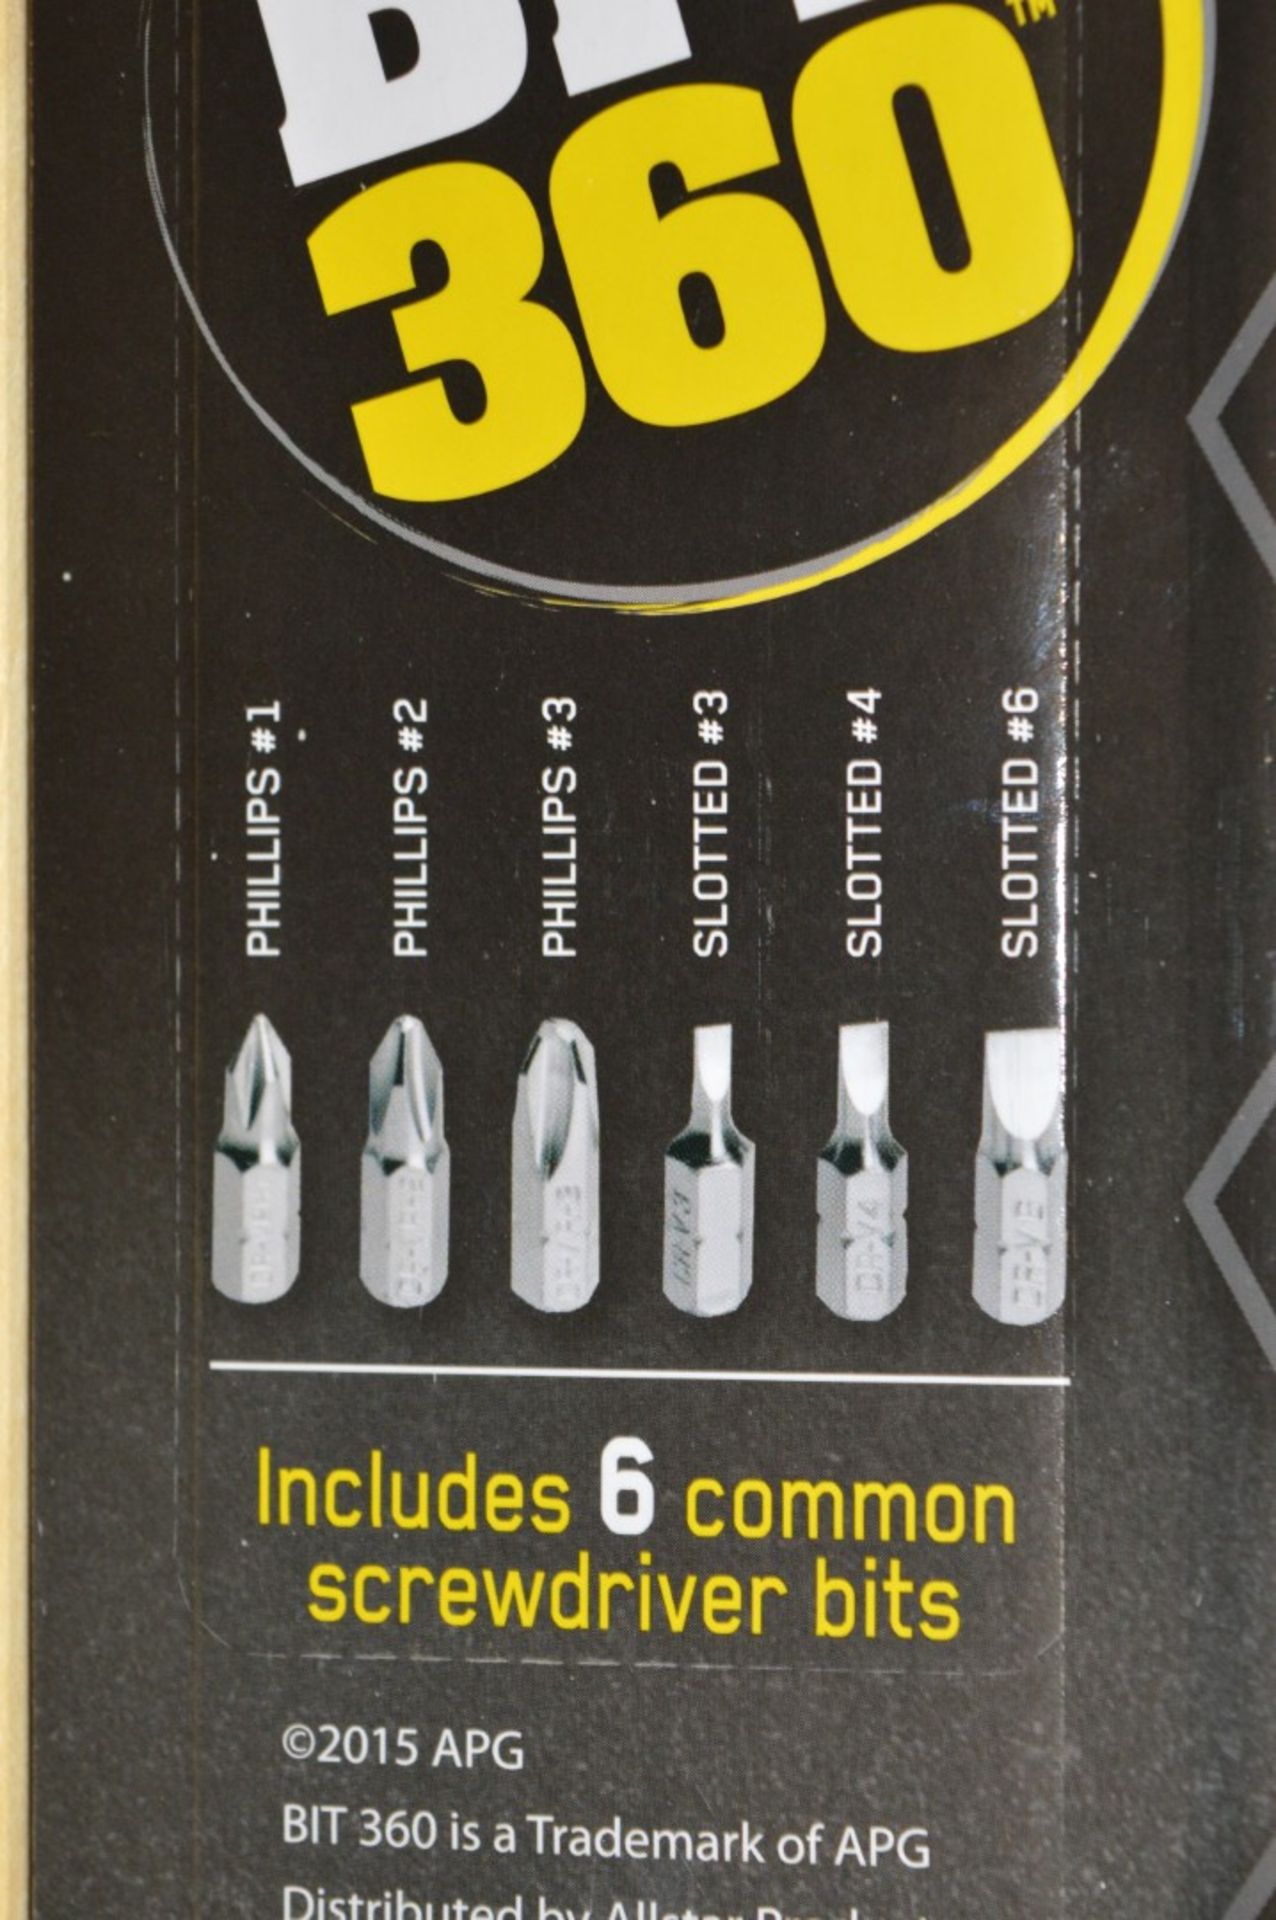 5 x Bit 360 All-in-One Screwdriver and Bit Set - The Screwdrive That Changes Bits Quickly and Easily - Image 4 of 7